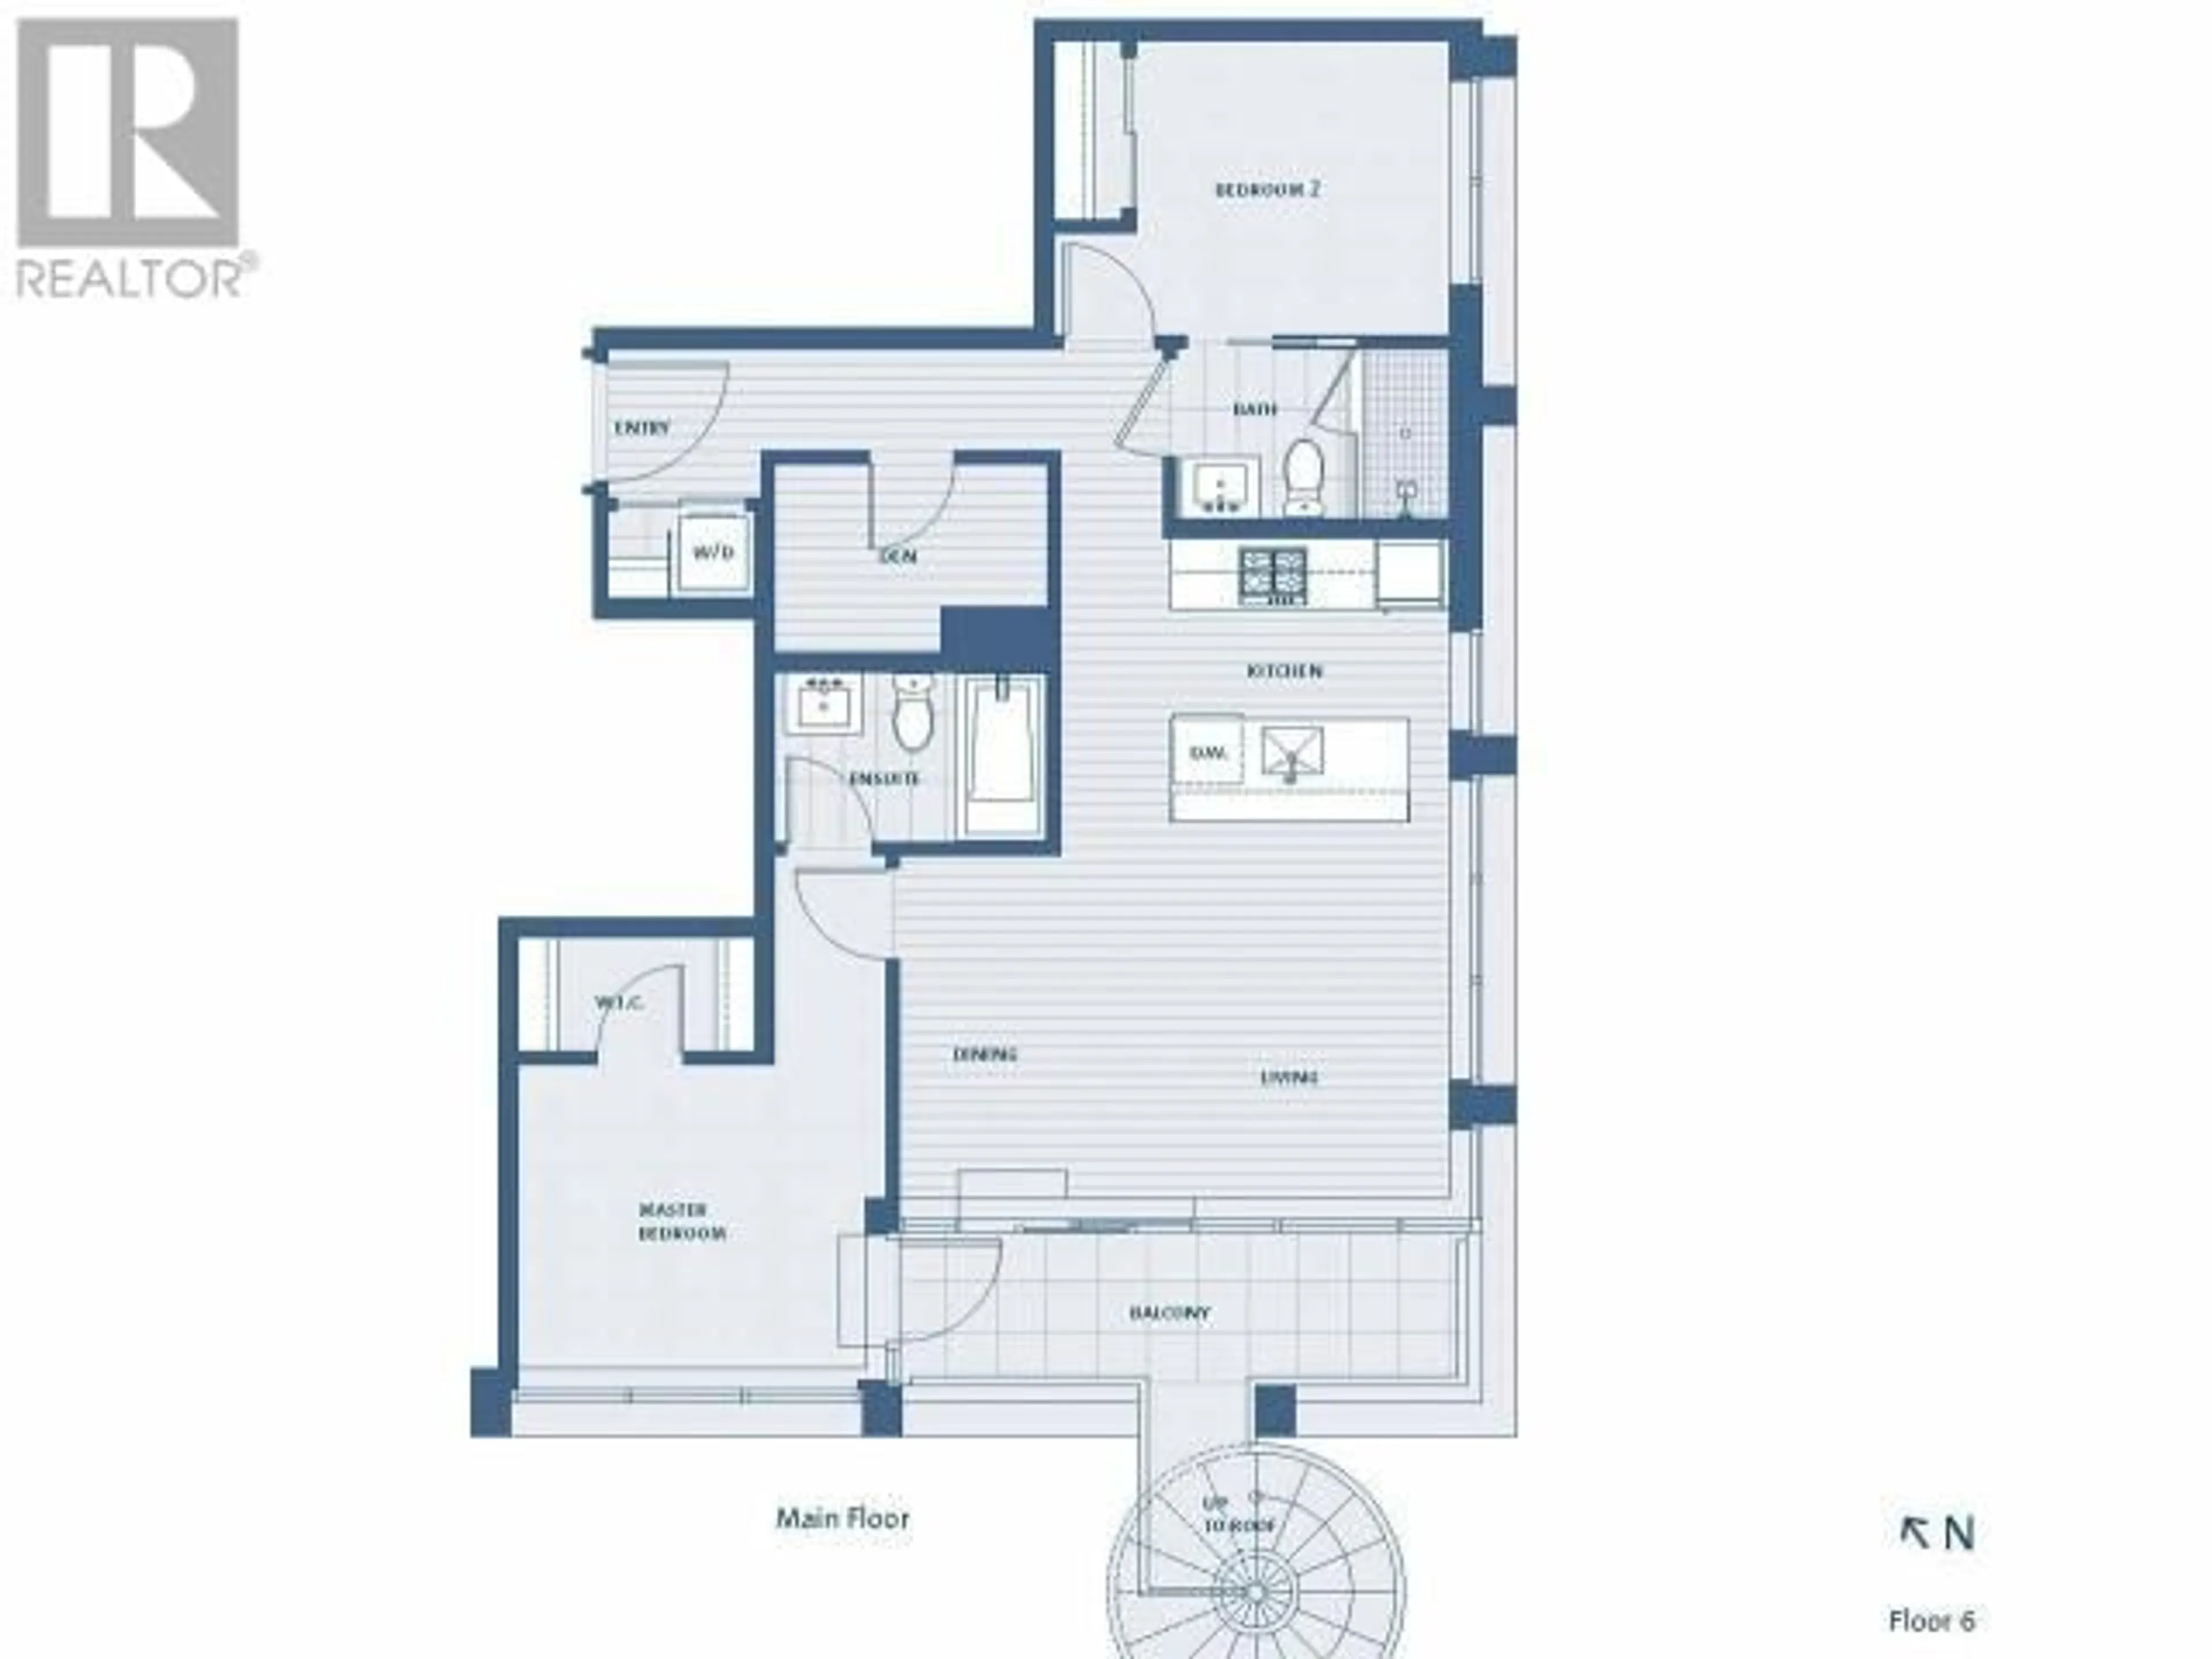 Floor plan for 620-2220 KINGSWAY, Out of Board Area British Columbia V5N2T7